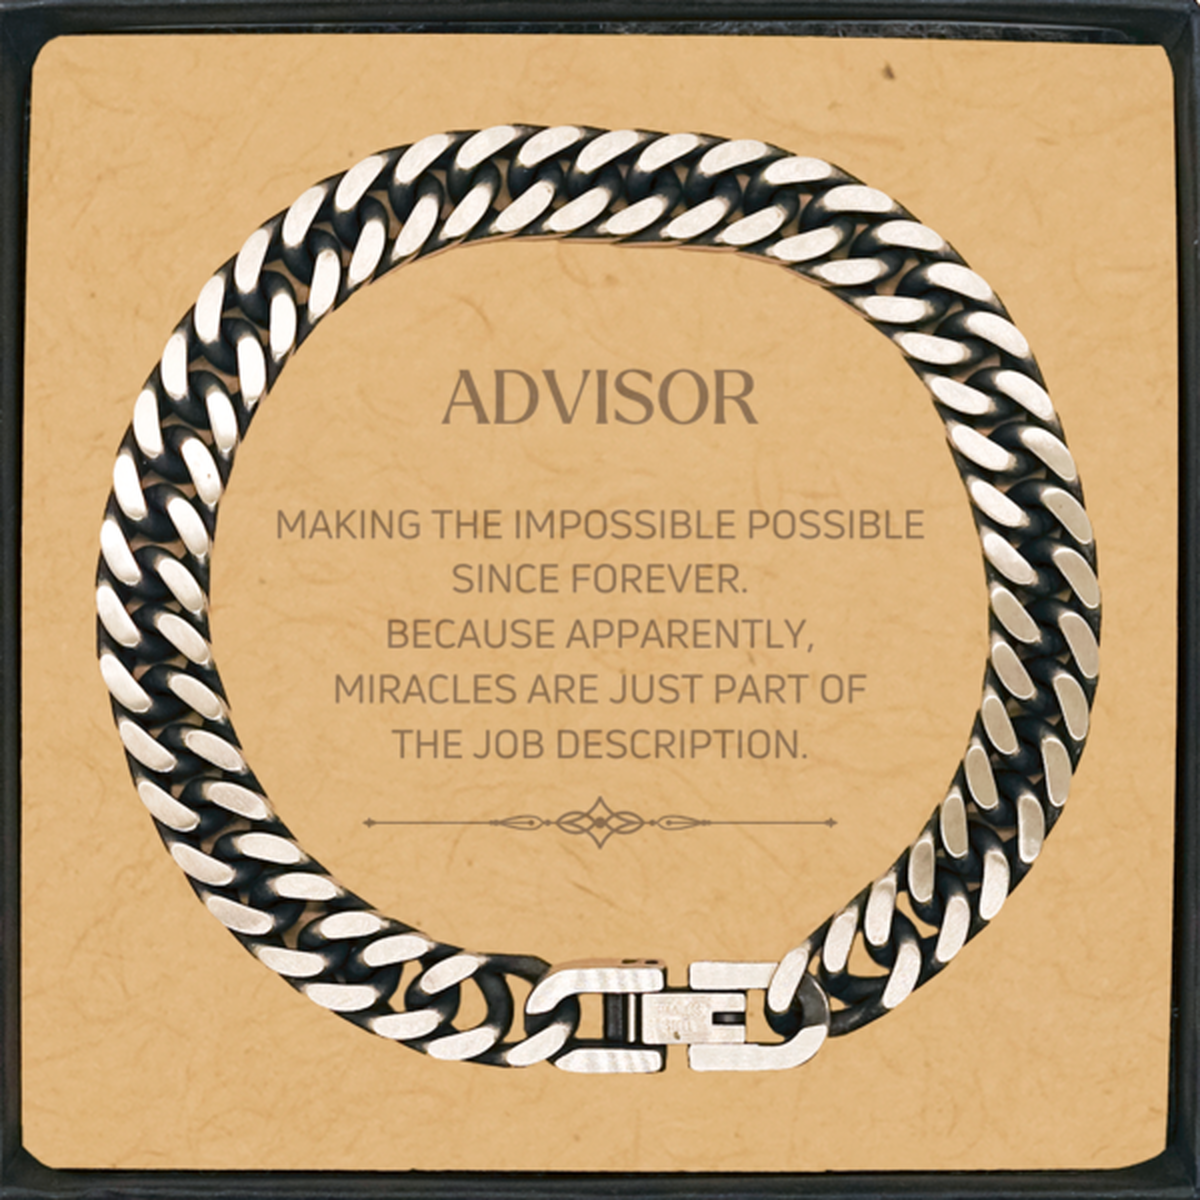 Funny Advisor Gifts, Miracles are just part of the job description, Inspirational Birthday Cuban Link Chain Bracelet For Advisor, Men, Women, Coworkers, Friends, Boss